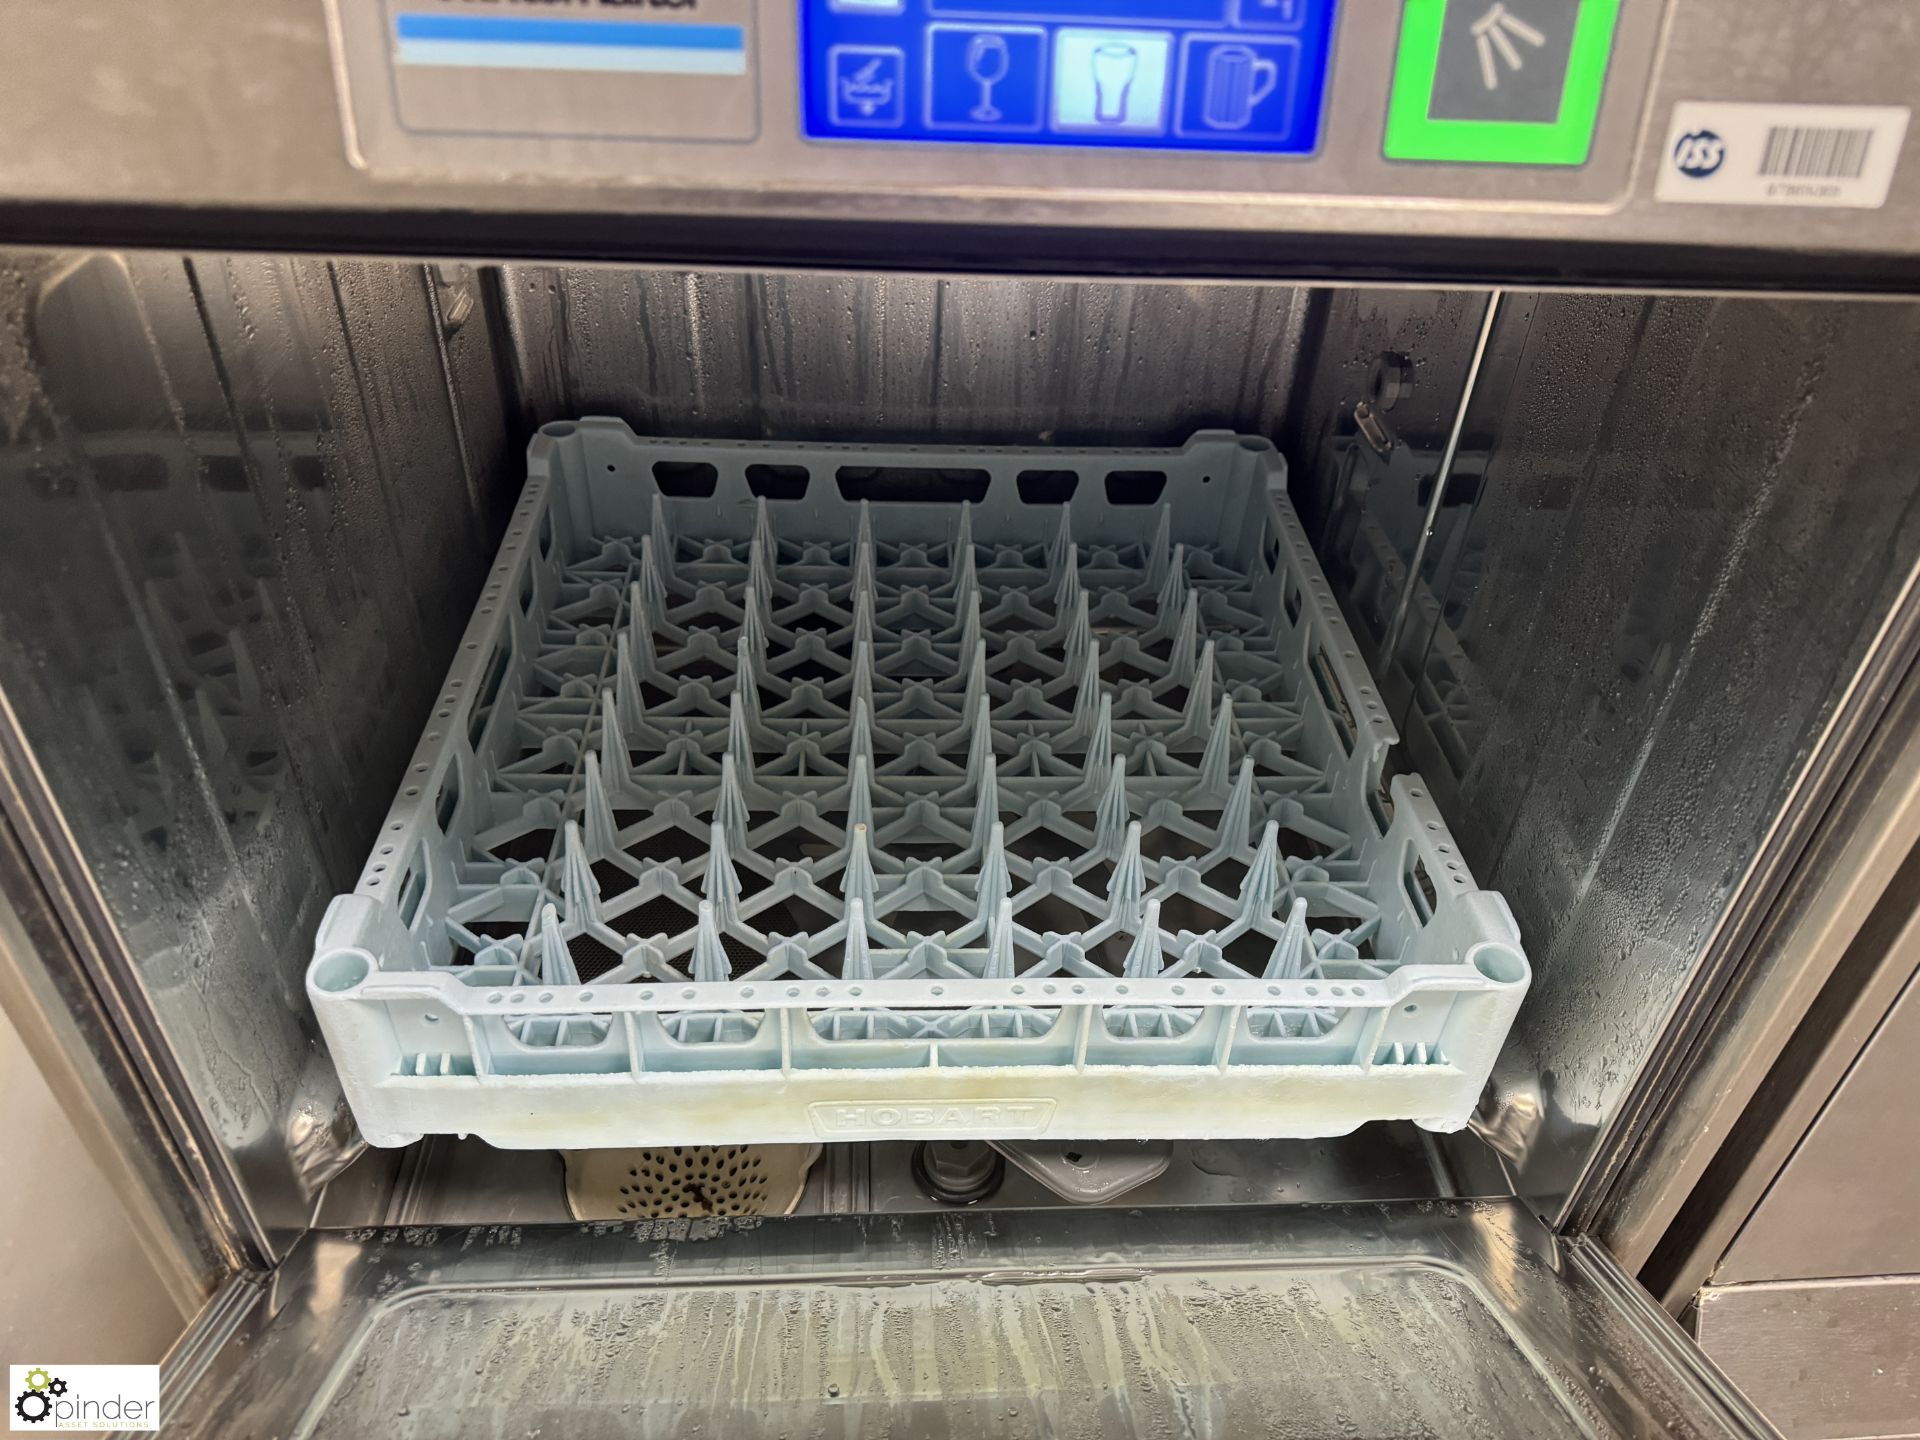 Winterhalter stainless steel under counter single tray Dishwasher (location in building – basement - Image 3 of 4